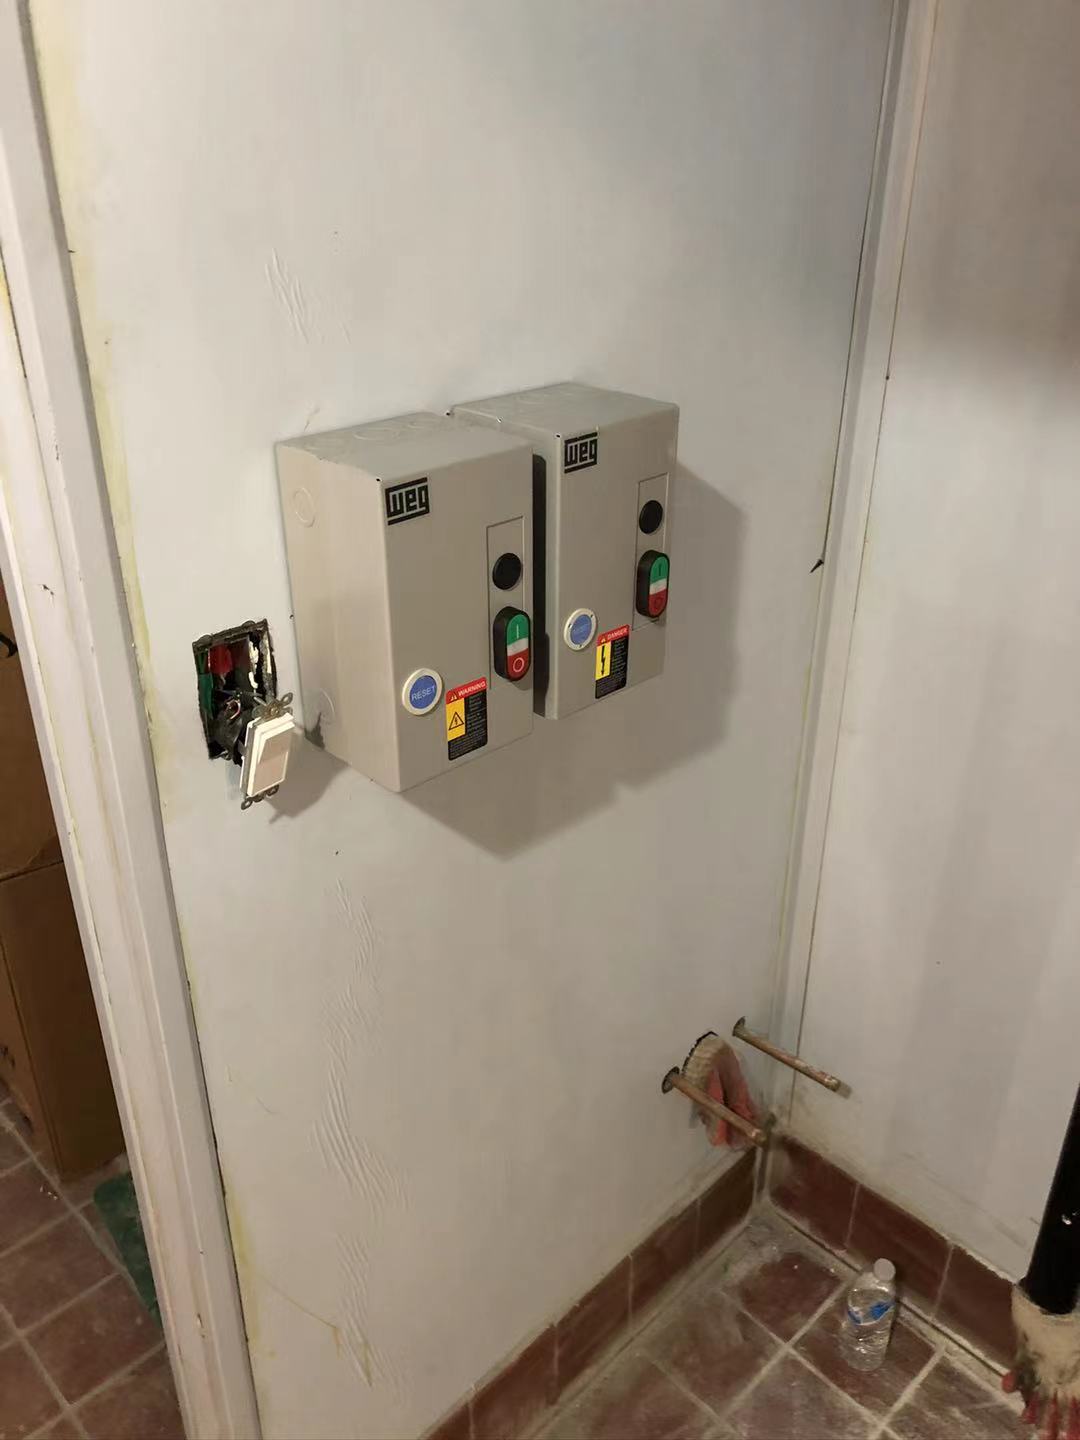 Exhaust fan starting switch and speed controller